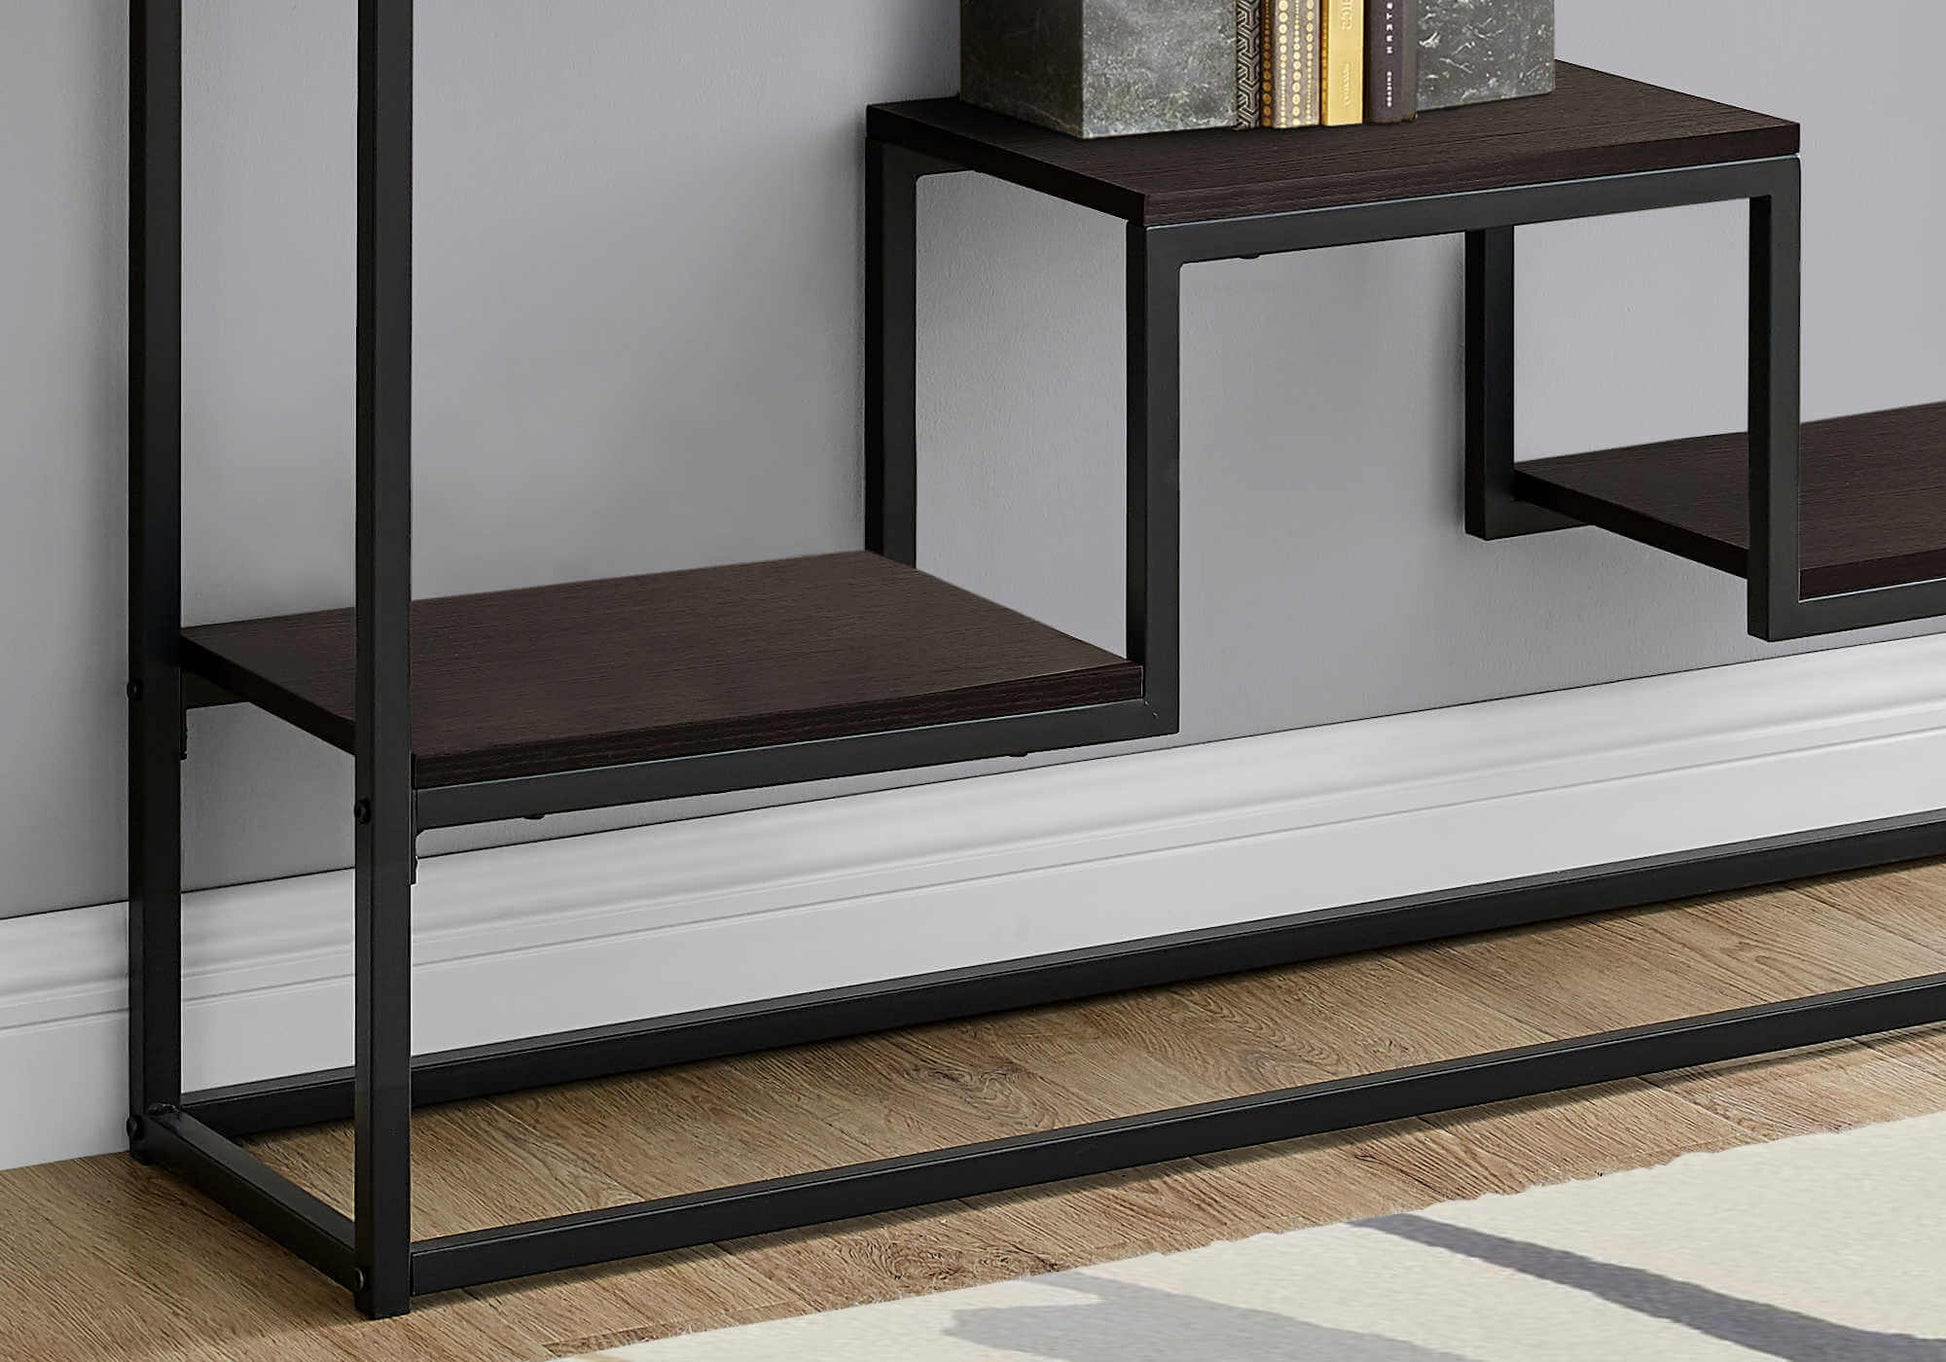 Monarch Specialties - 48"L 3-Tier Black Metal Bedroom Accent Console Table with Laminate Top - I 3579